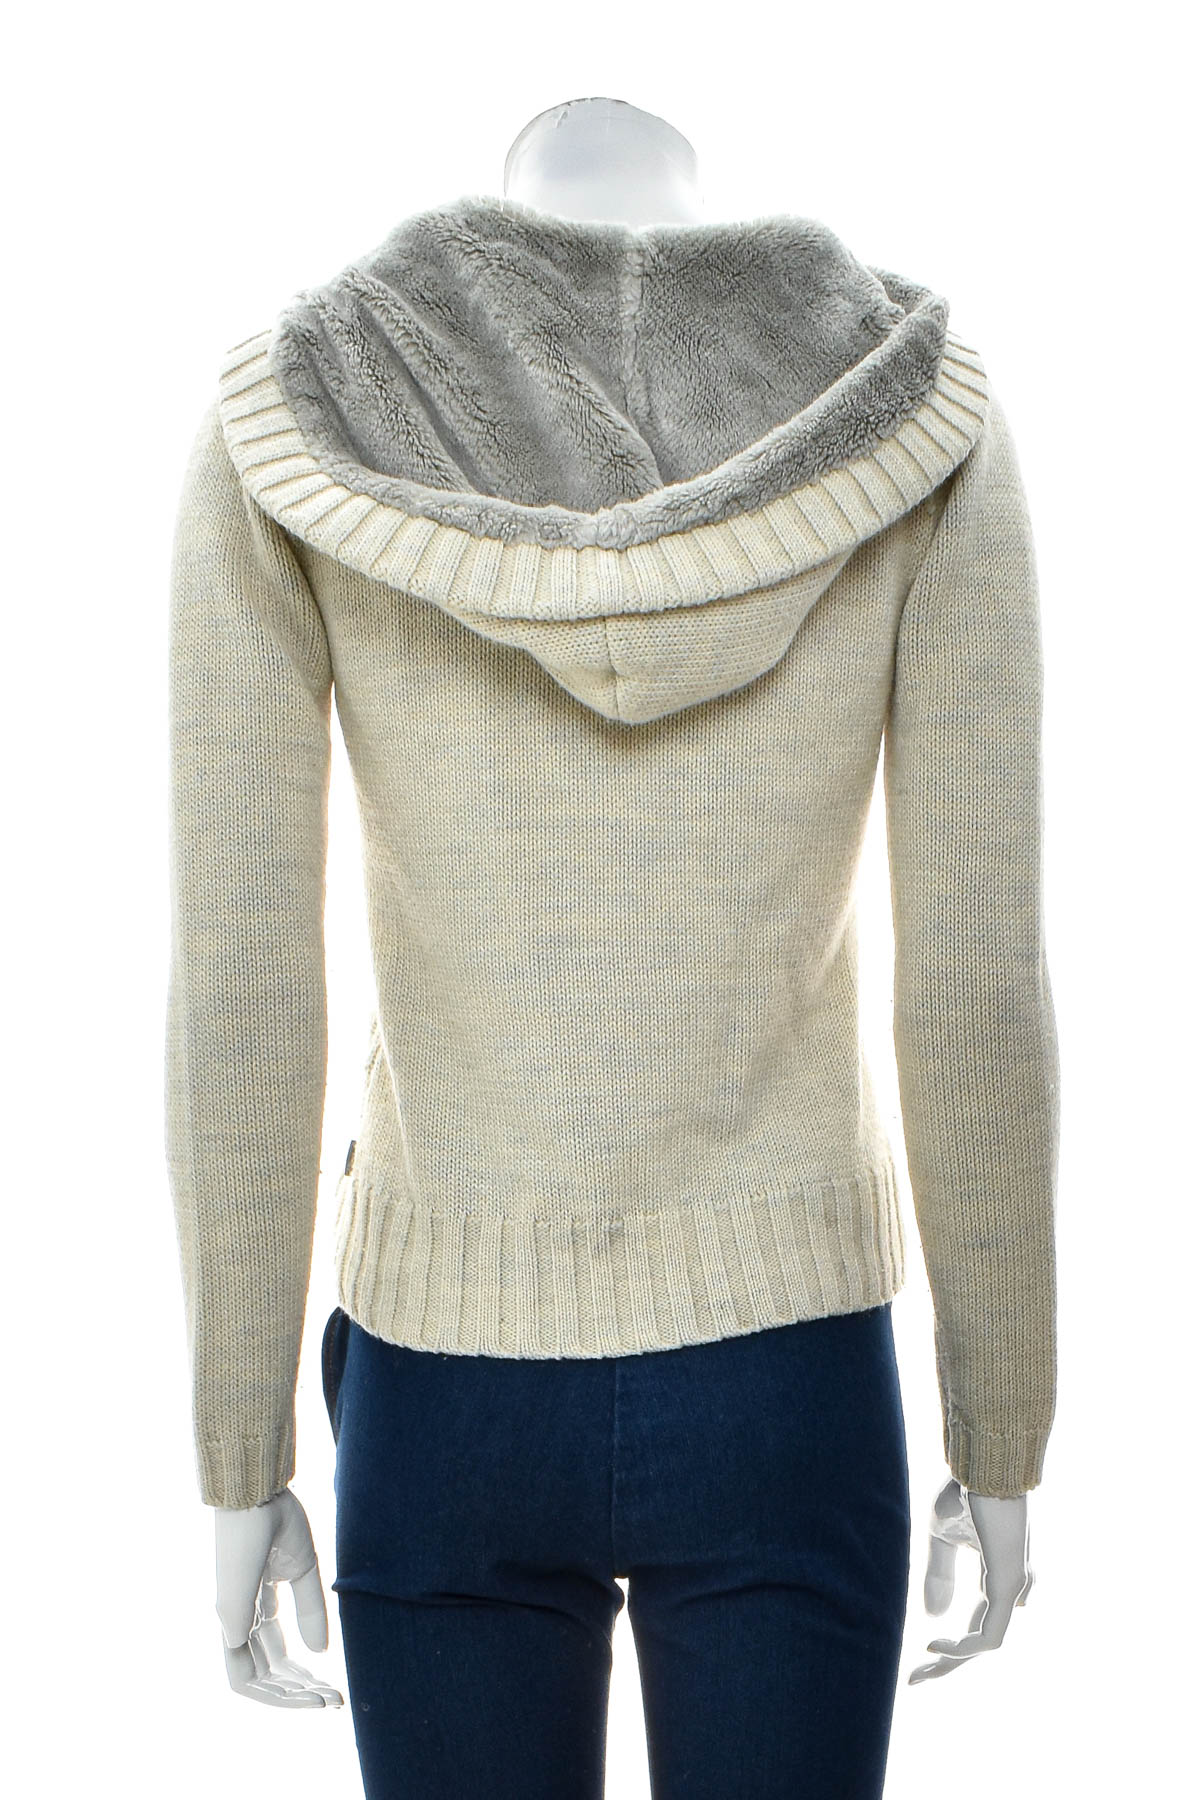 Women's cardigan - The North Face - 1